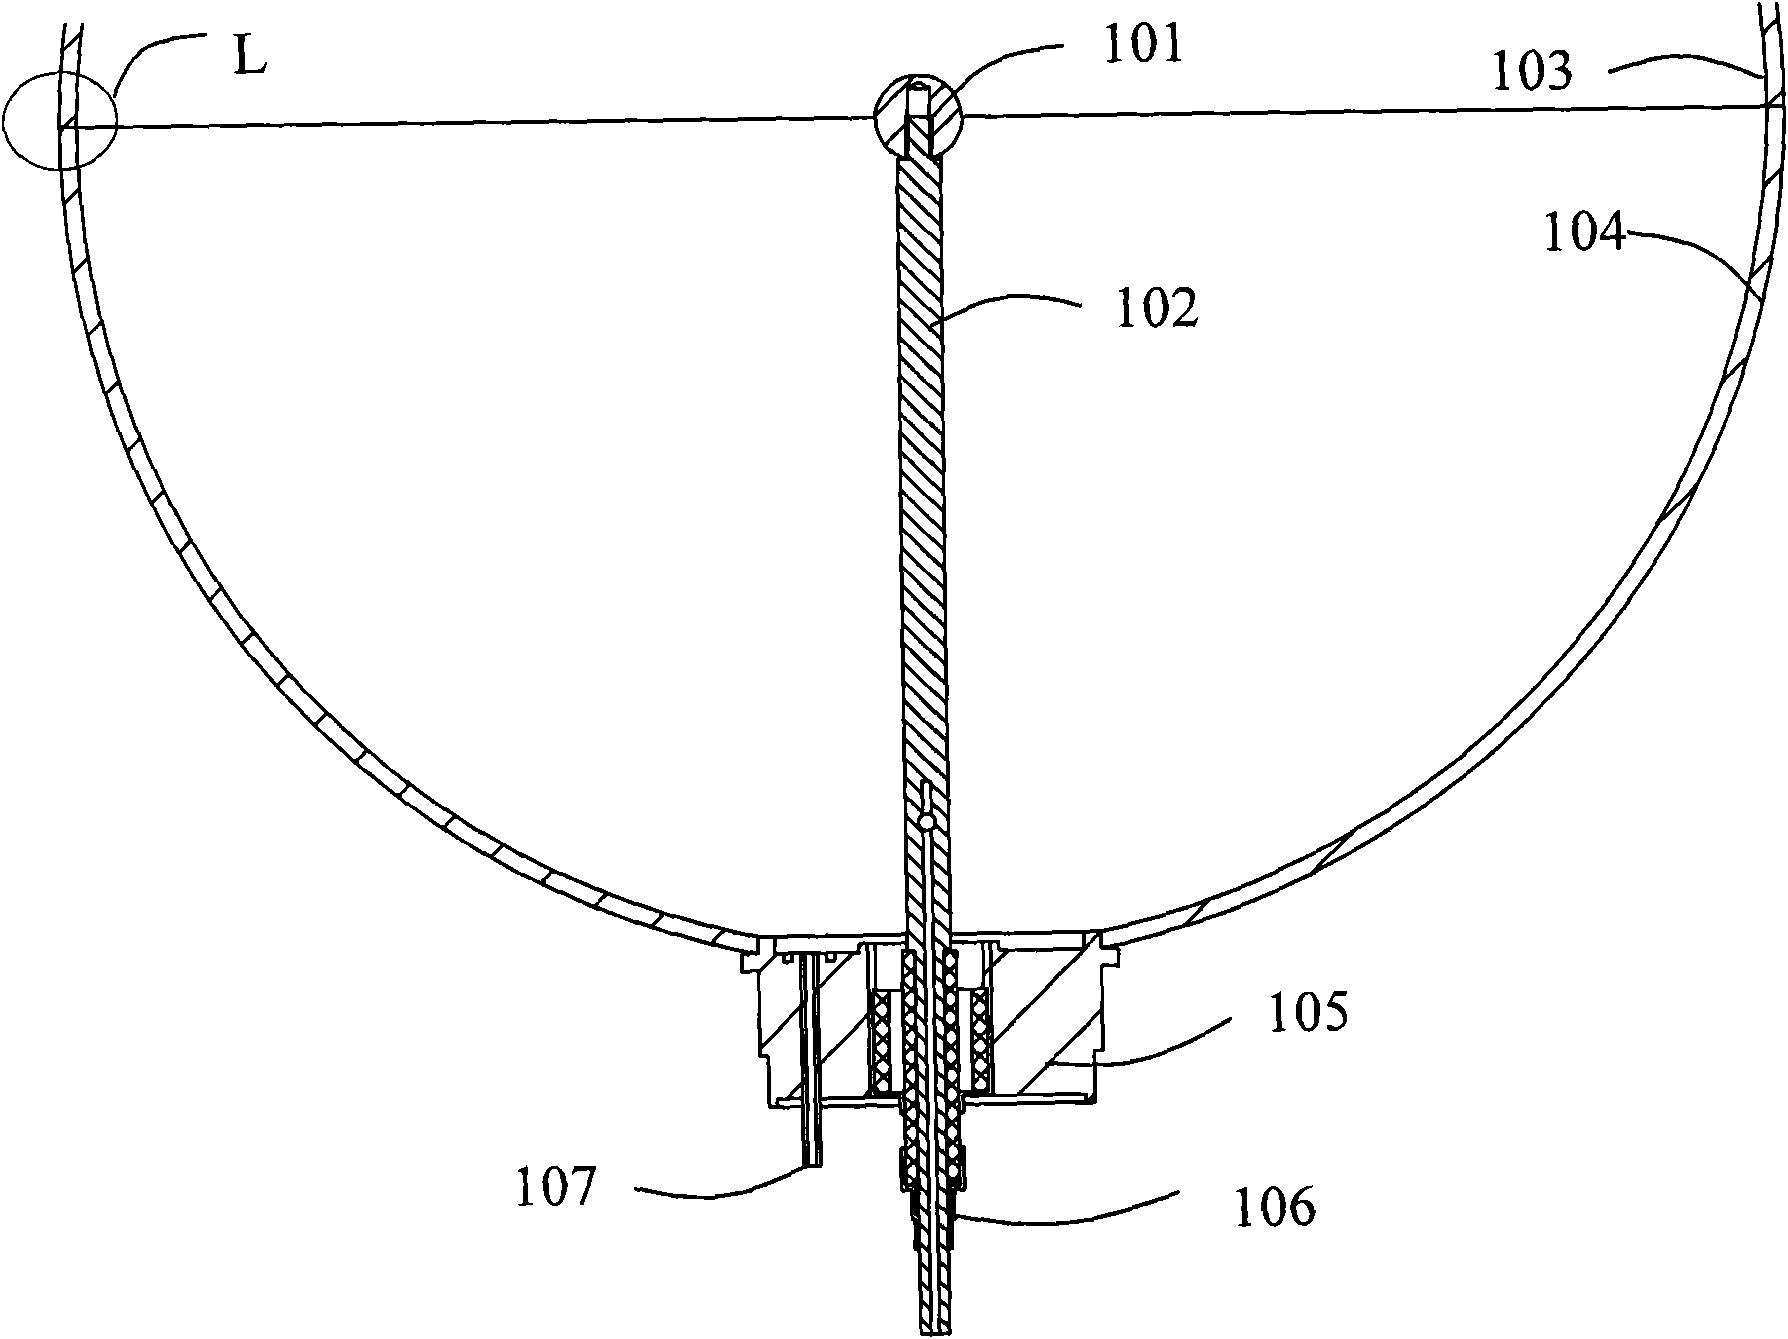 Detector device used for radiation monitoring